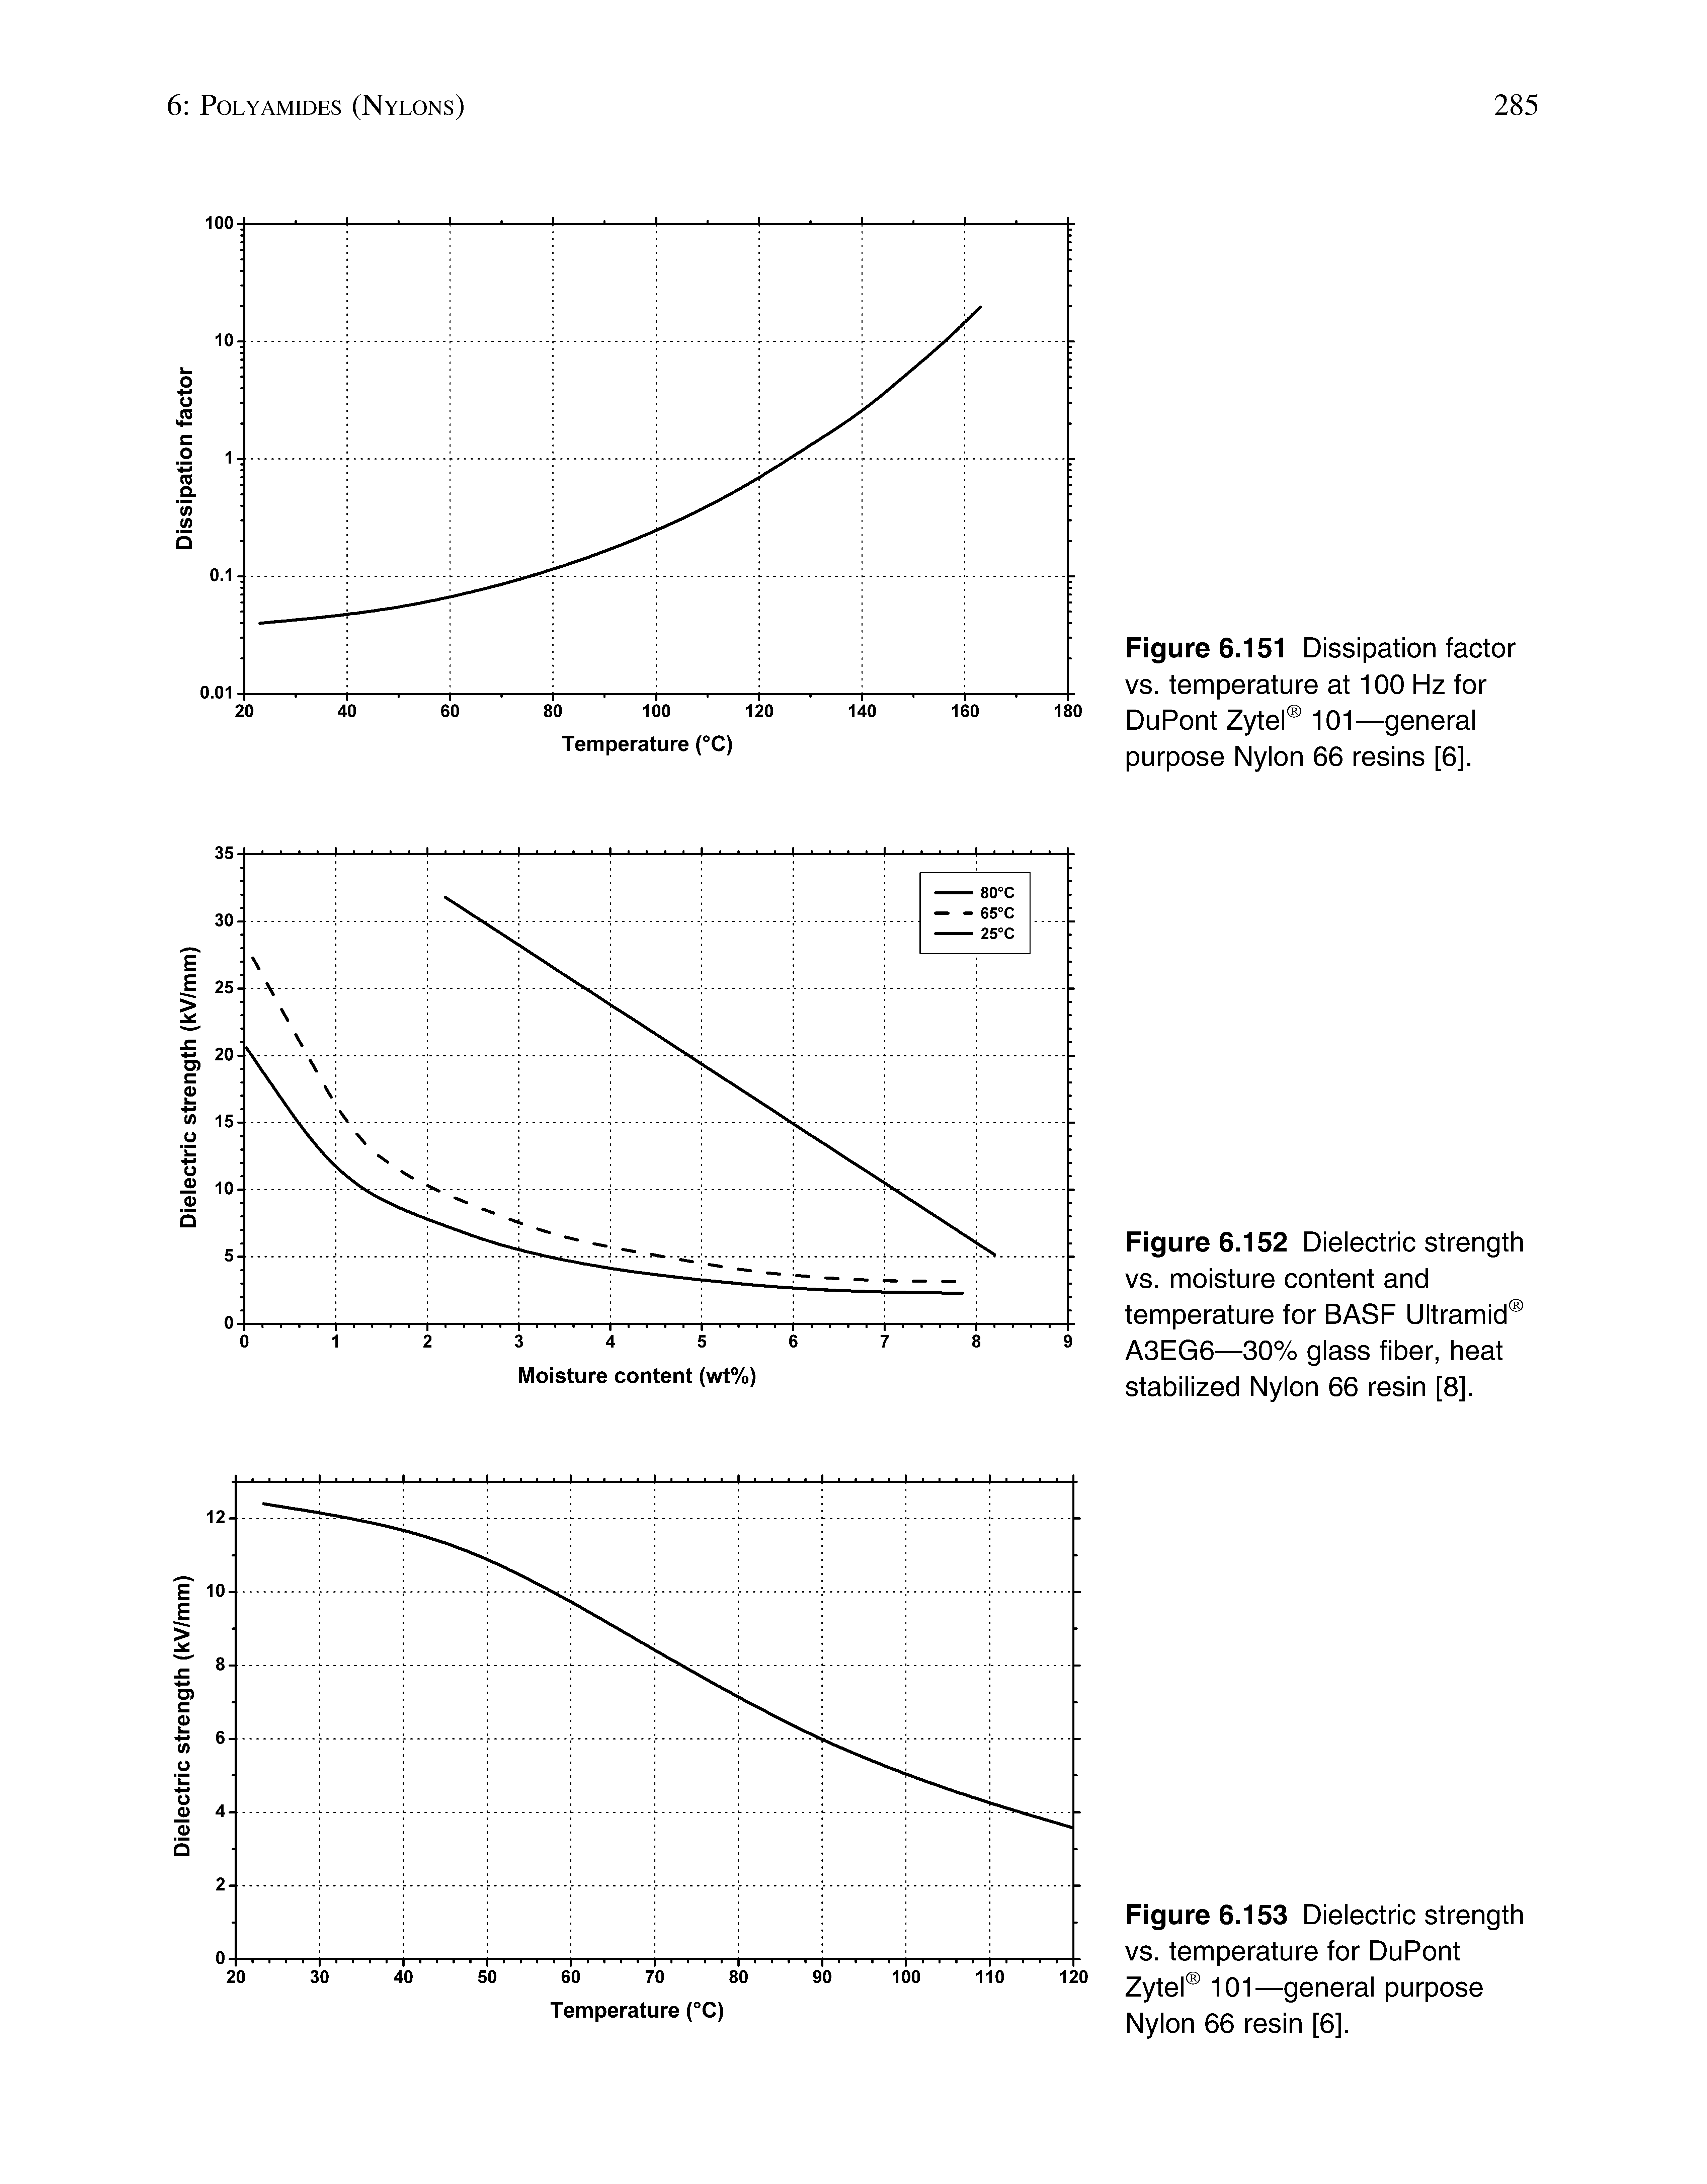 Figure 6.152 Dielectric strength vs. moisture content and temperature for BASF Ultramid A3EG6—30% glass fiber, heat stabilized Nylon 66 resin [8].